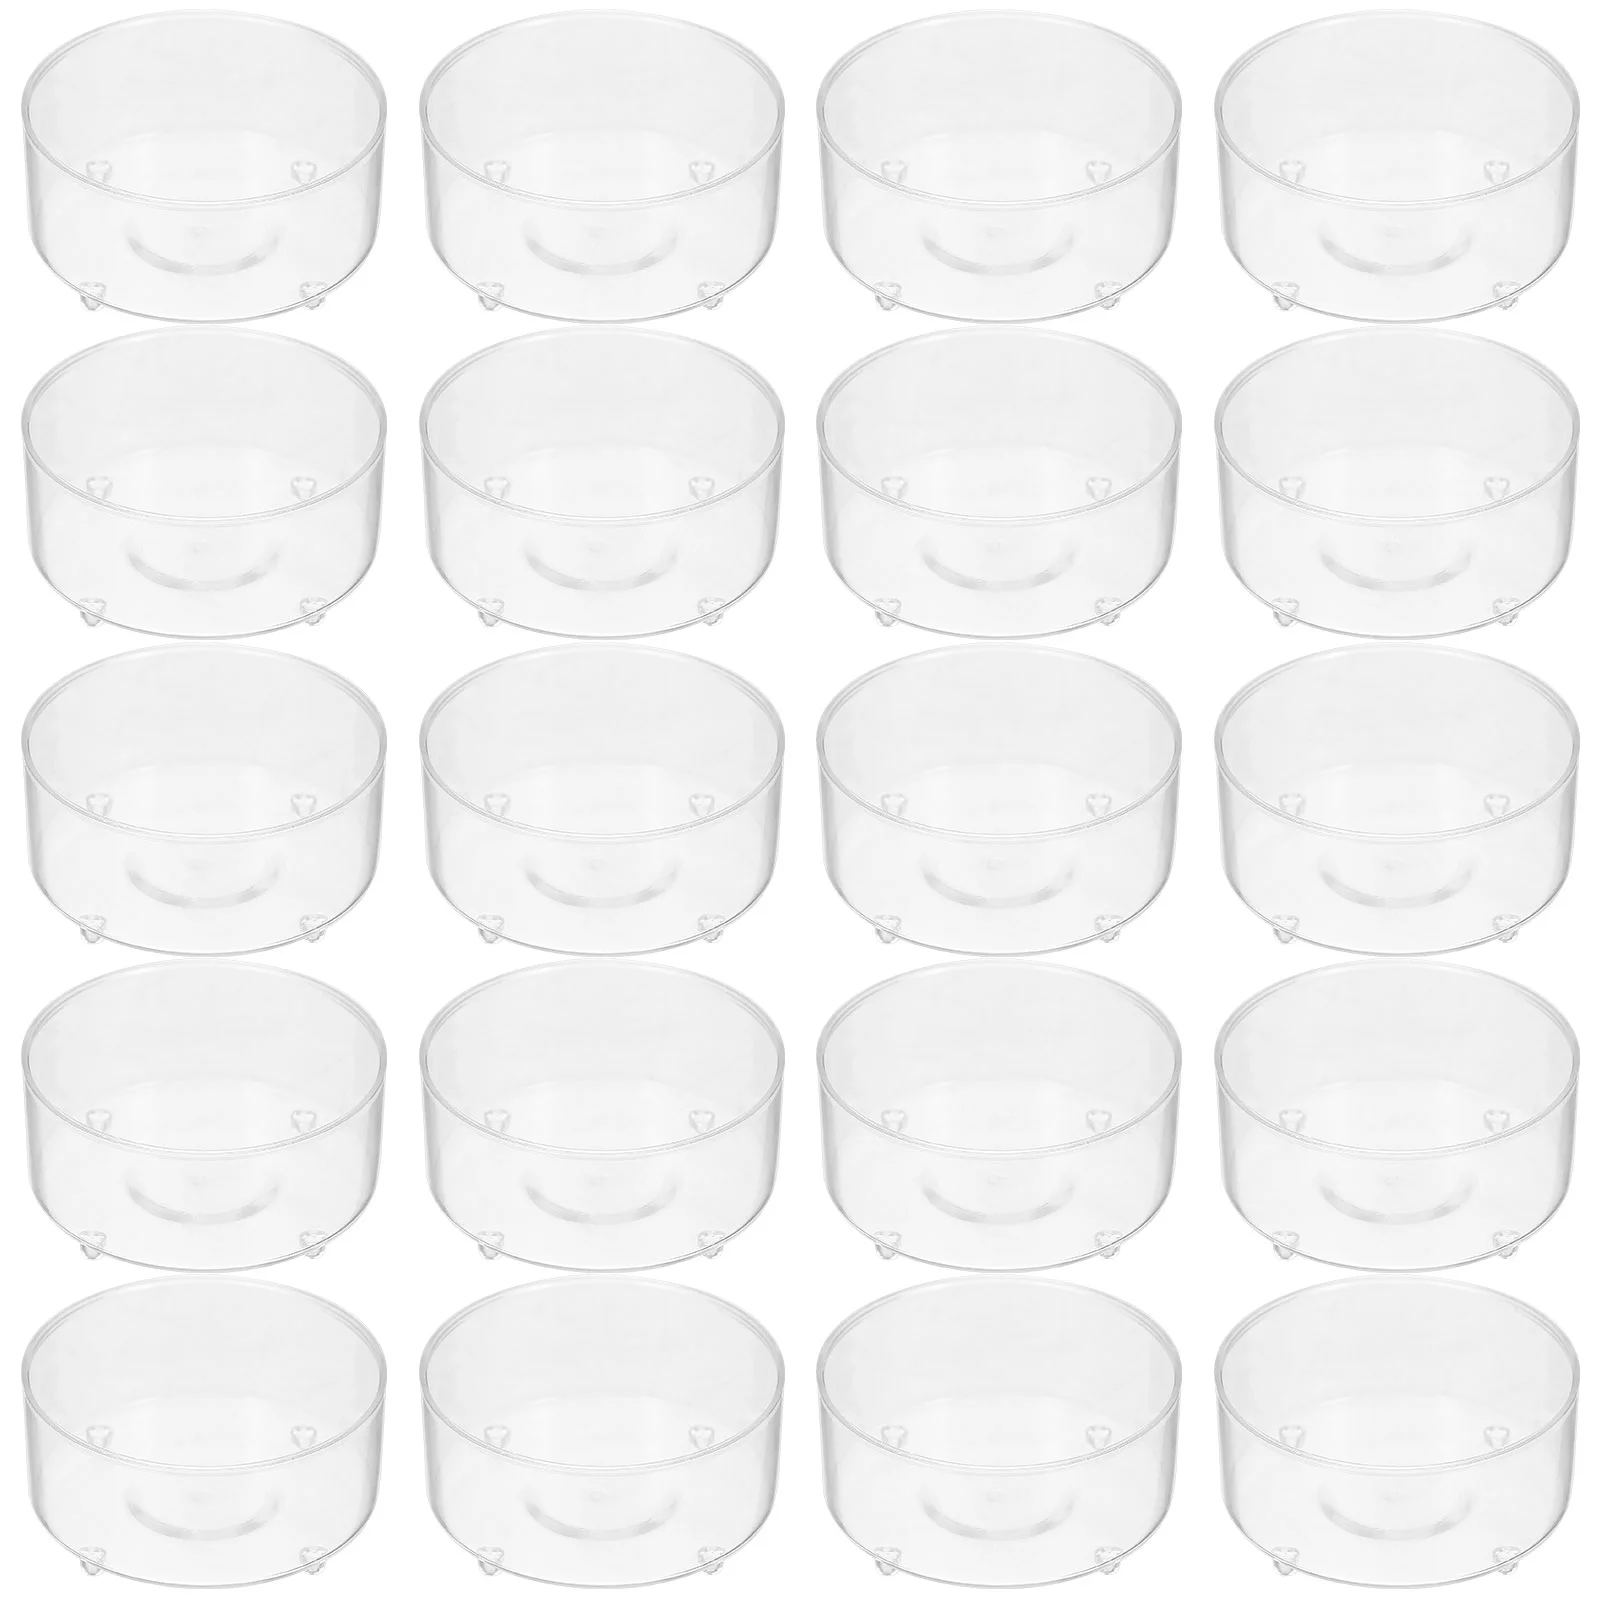 

Sewacc Plastic Candle Cup Candle Making Molds 100Pcs Tea Light Cups Empty Candle Wax Containers Clear Candle Cup Plastic